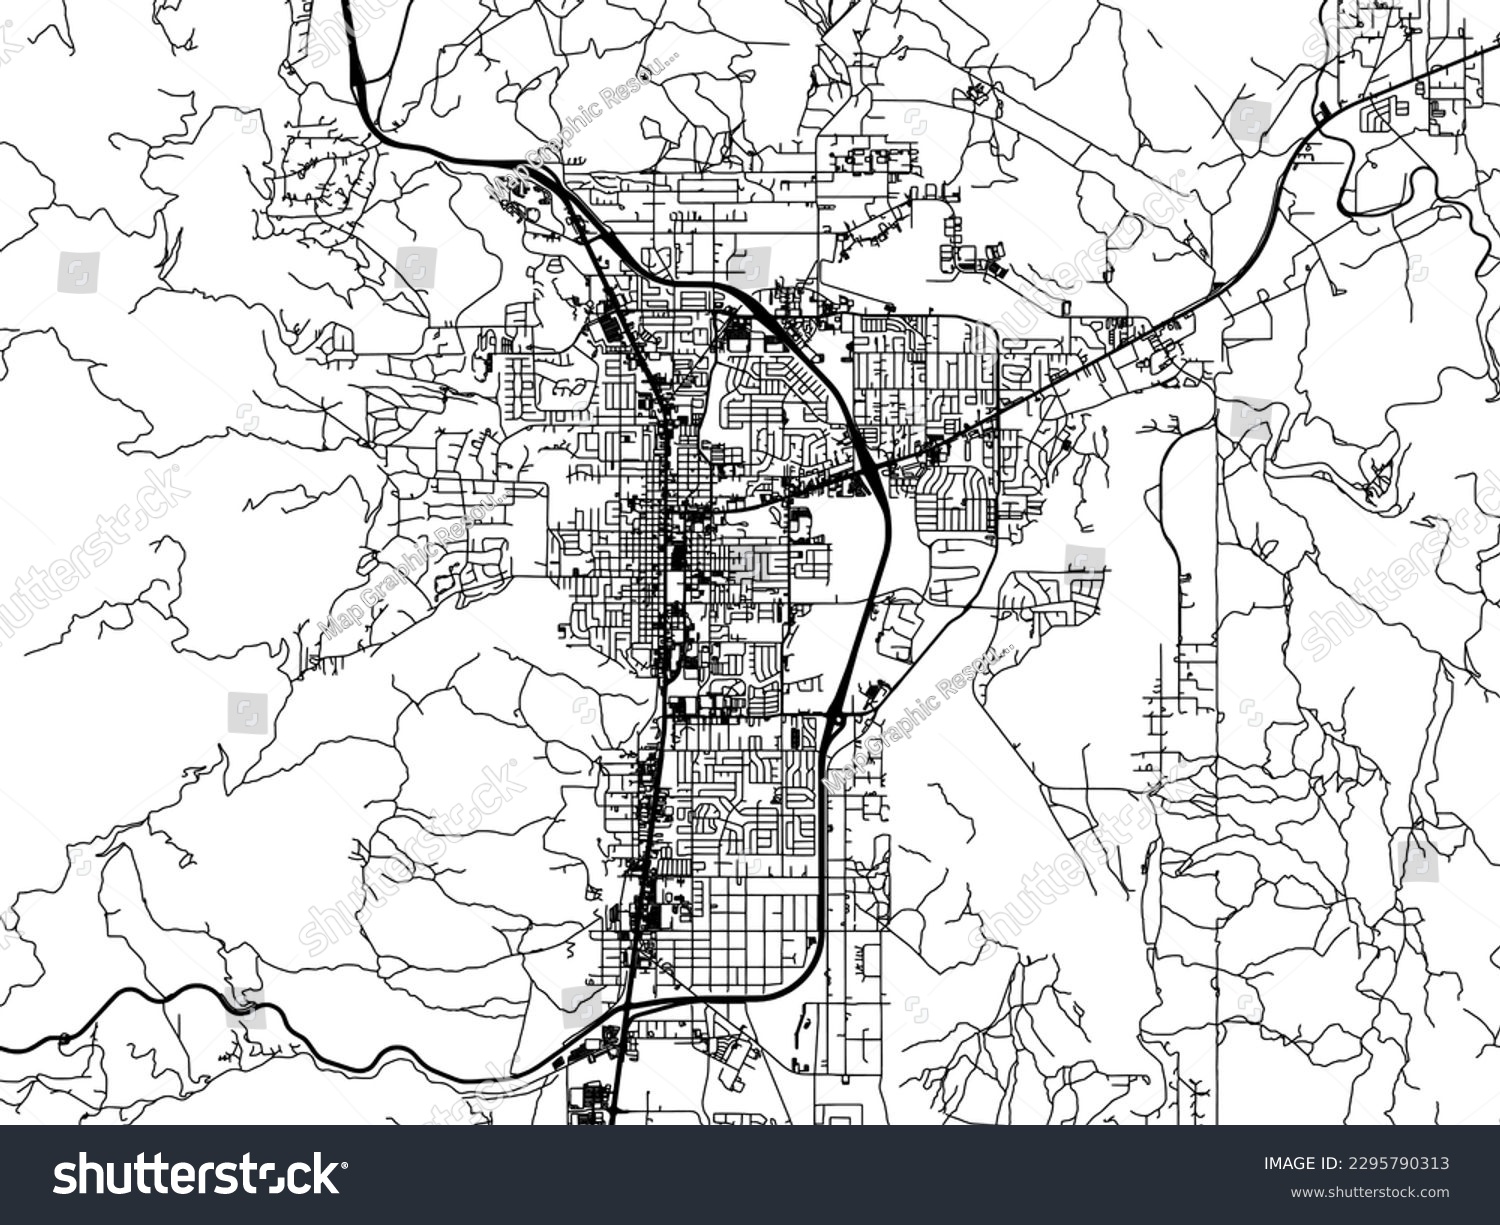 SVG of Vector city map of Carson City Nevada in the United States of America with black roads isolated on a white background. svg